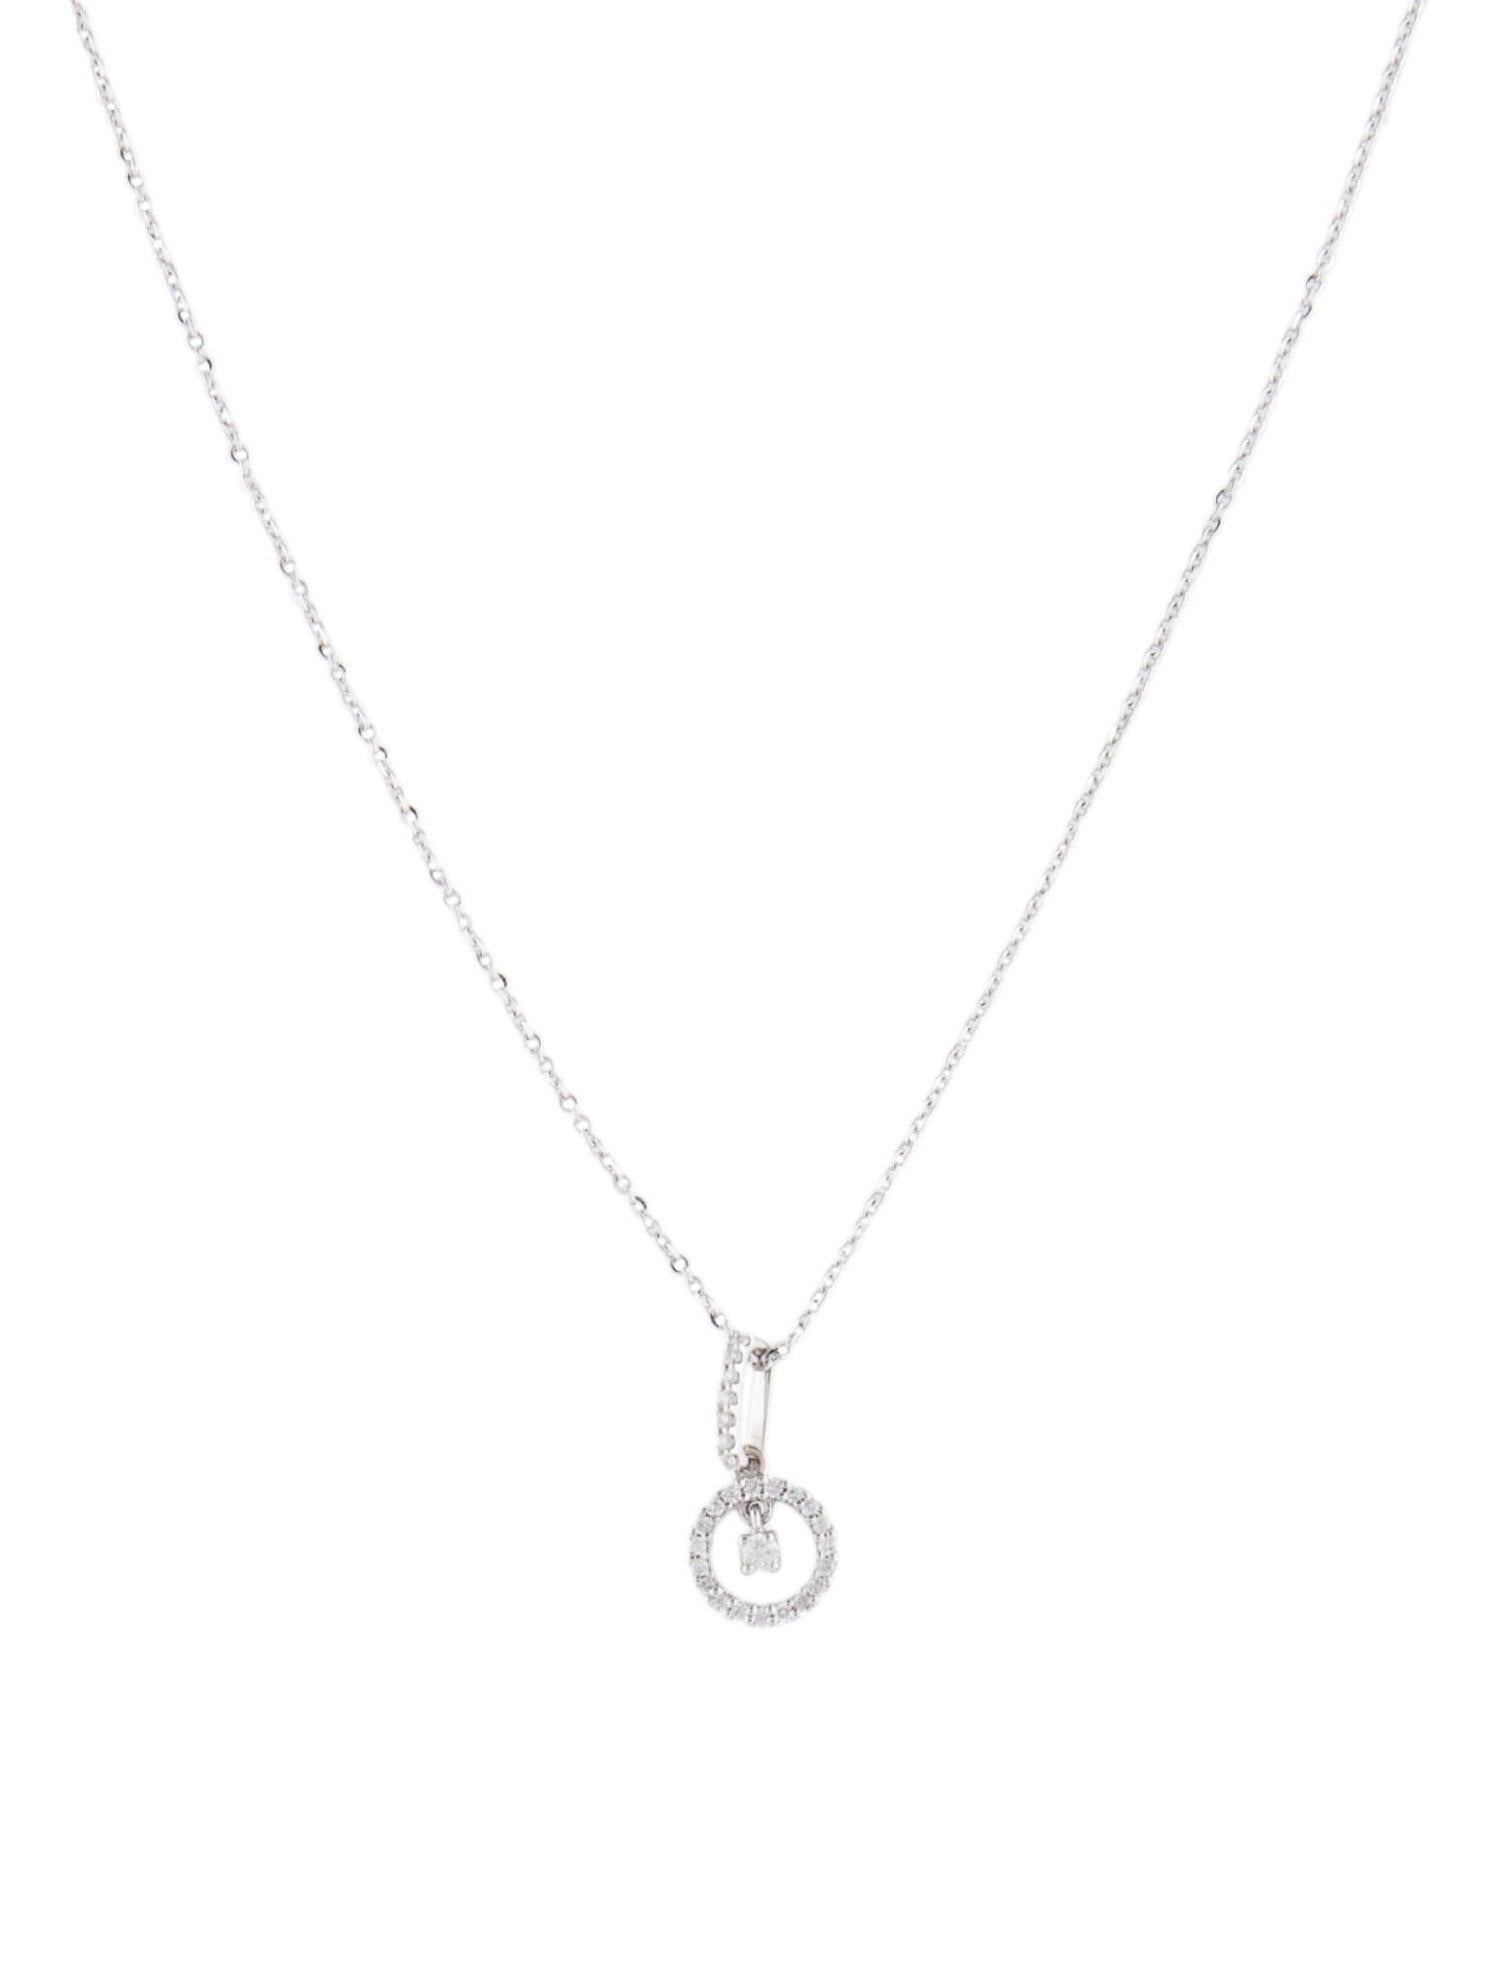 Luxury 14K Diamond Pendant Necklace - Exquisite Statement Piece in White Gold In New Condition For Sale In Holtsville, NY